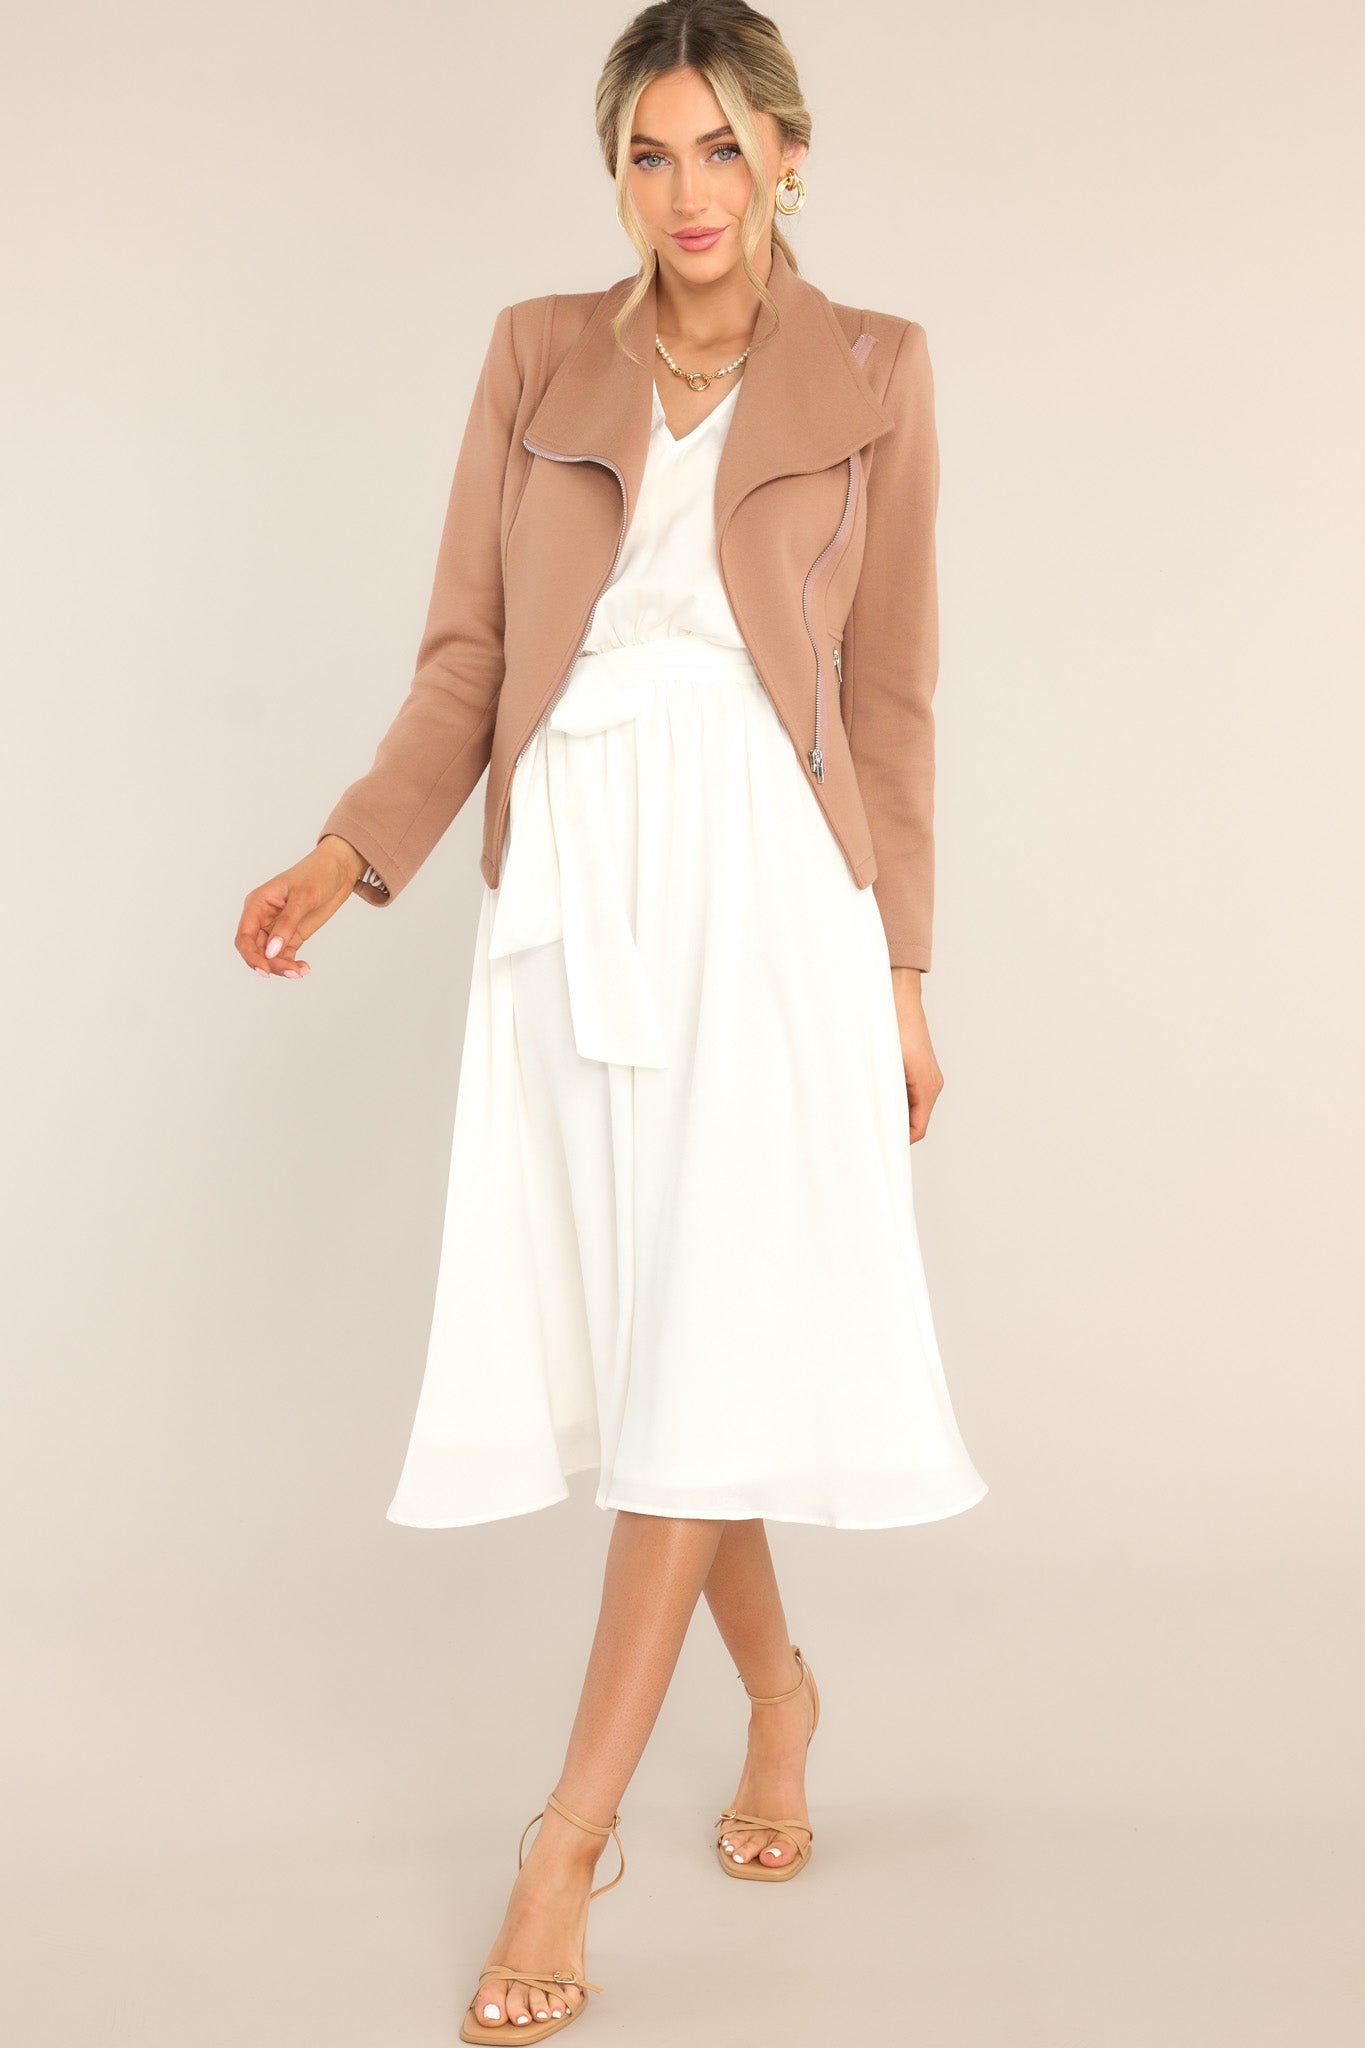 Full body view of this midi dress that features a V-neckline, an open back with a self-tie closure, flowy cap sleeves, an elastic waistband with a self-tie fabric belt, and button detailing down the side of the skirt.